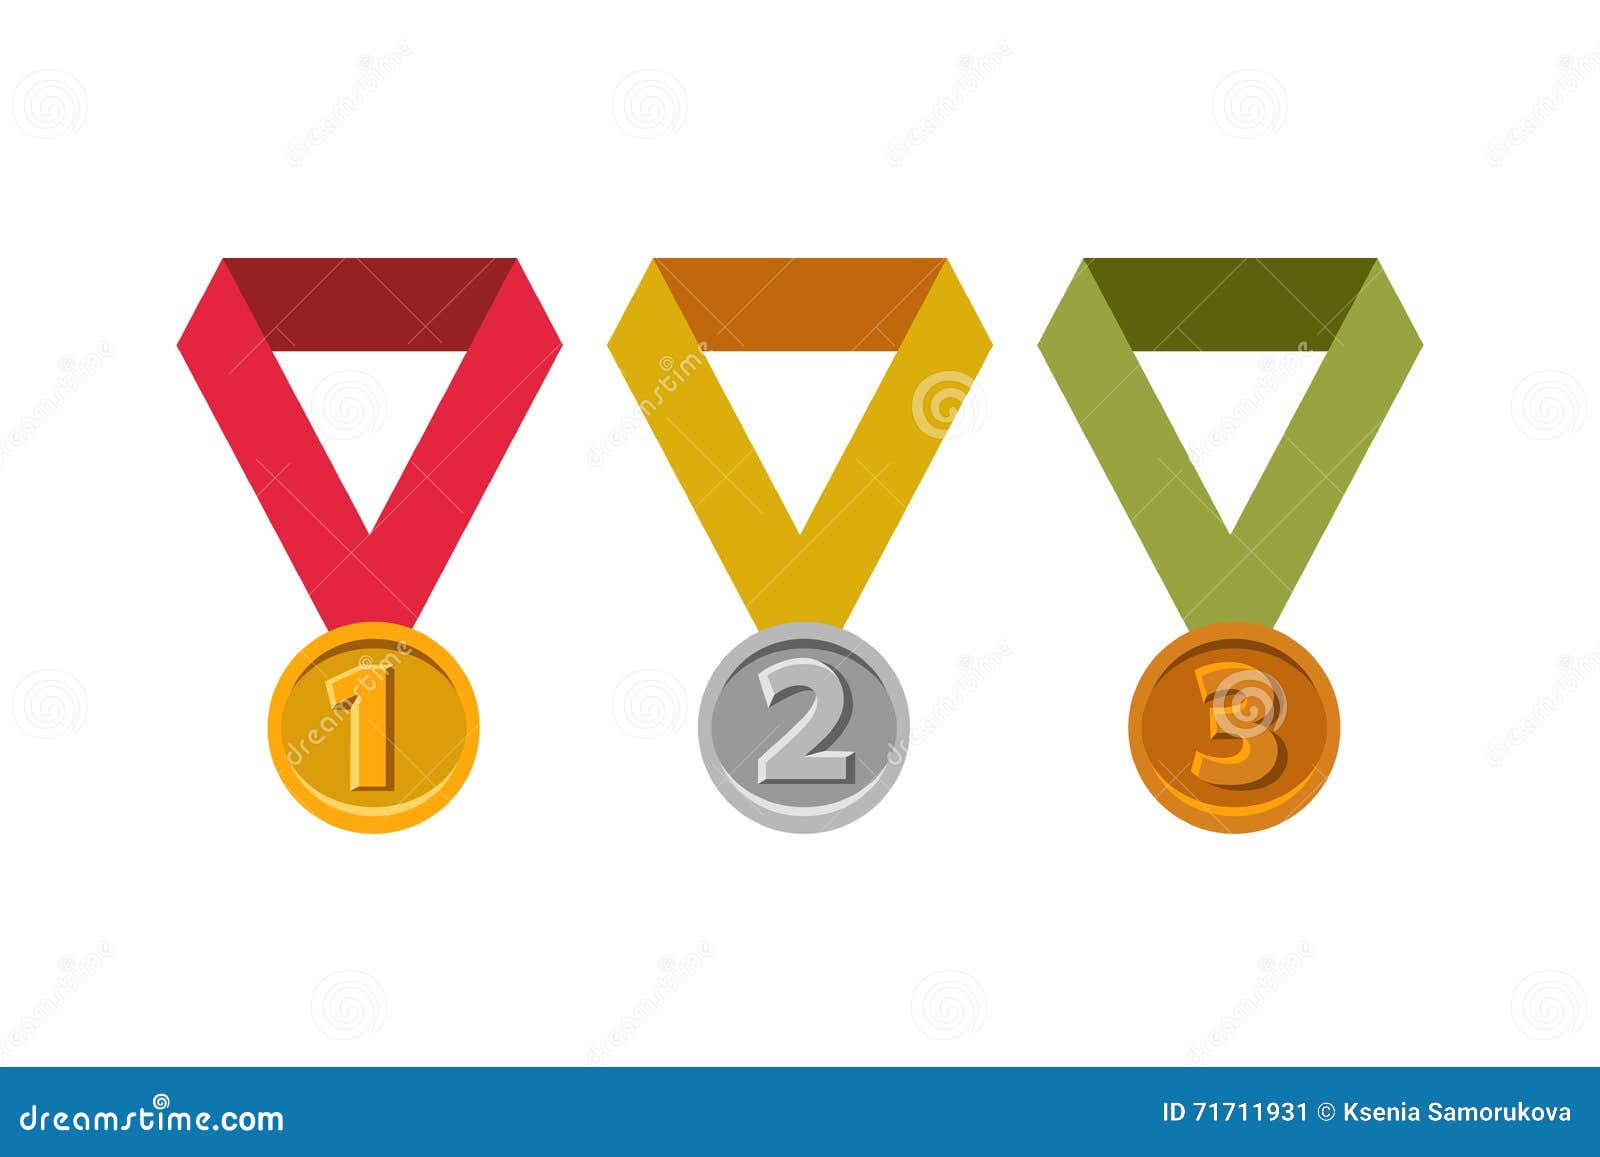 awards for first, second, third places. gold, silver, bronze